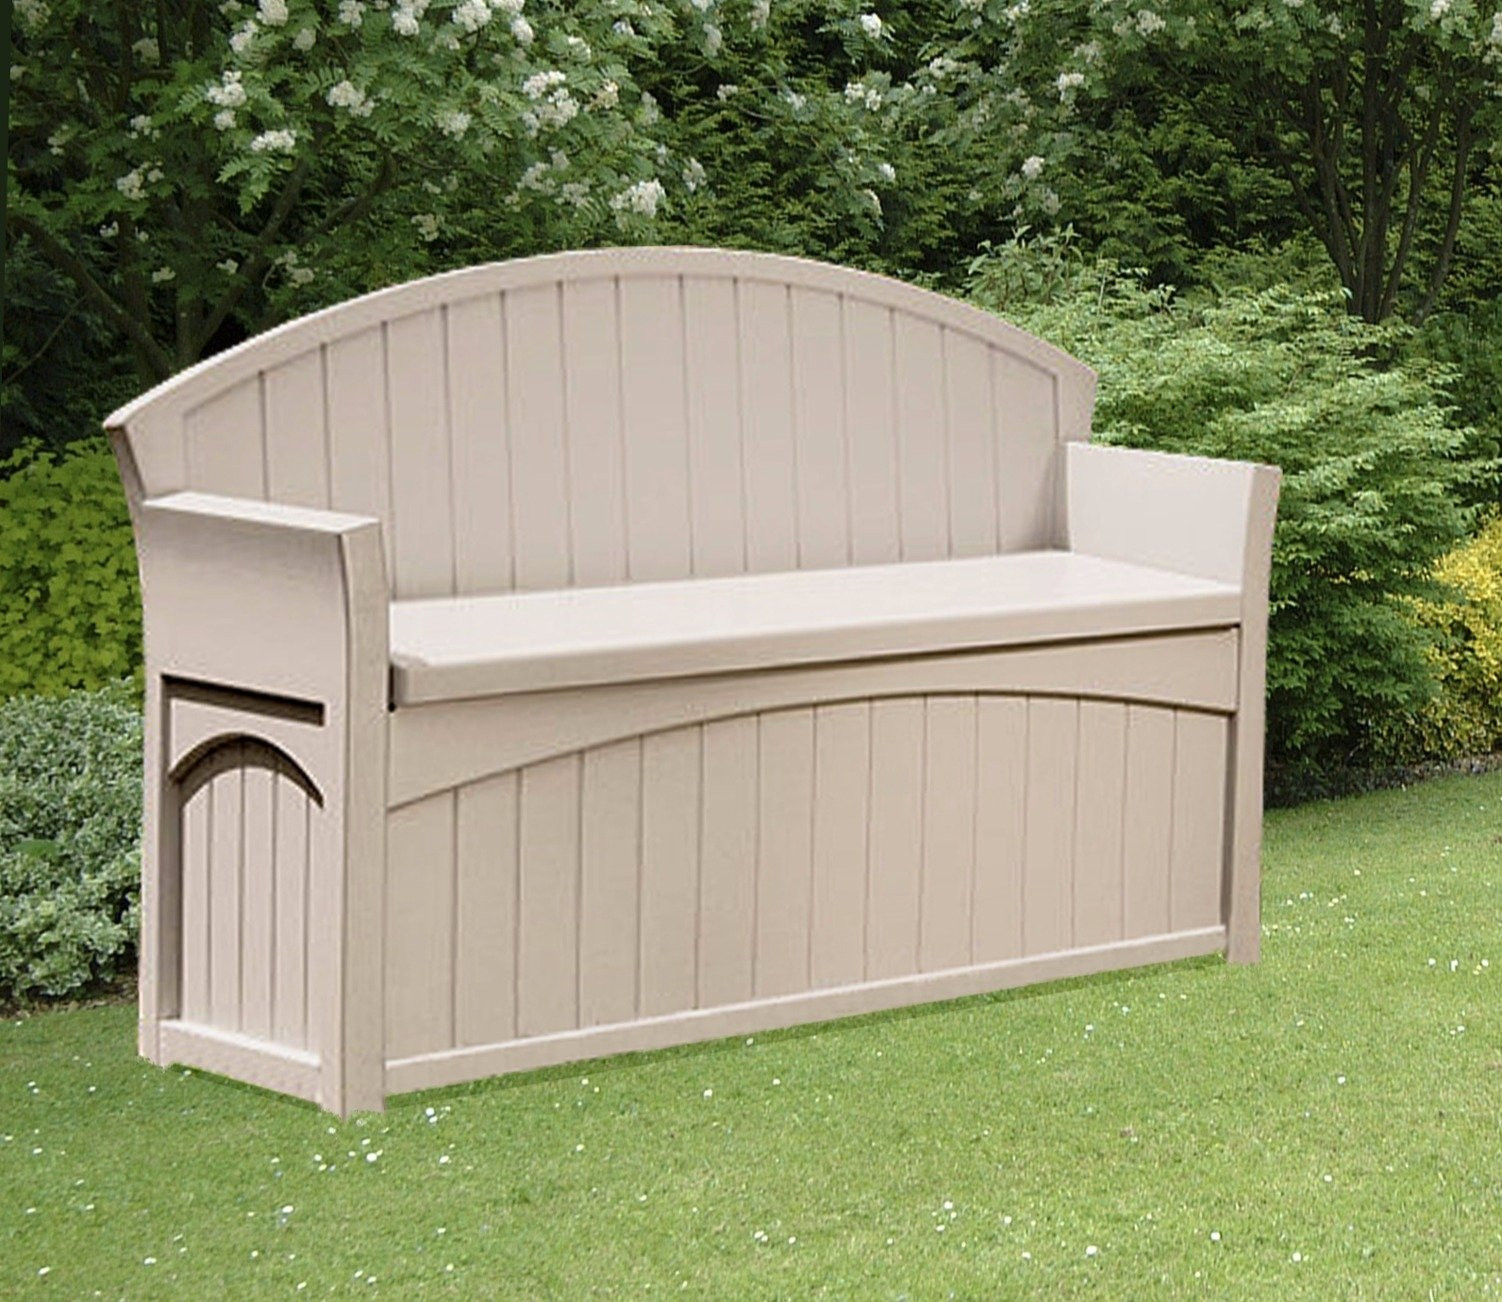 Storage Bench Outside
 Suncast Patio Garden Outdoor Bench with 50 Gallon Storage